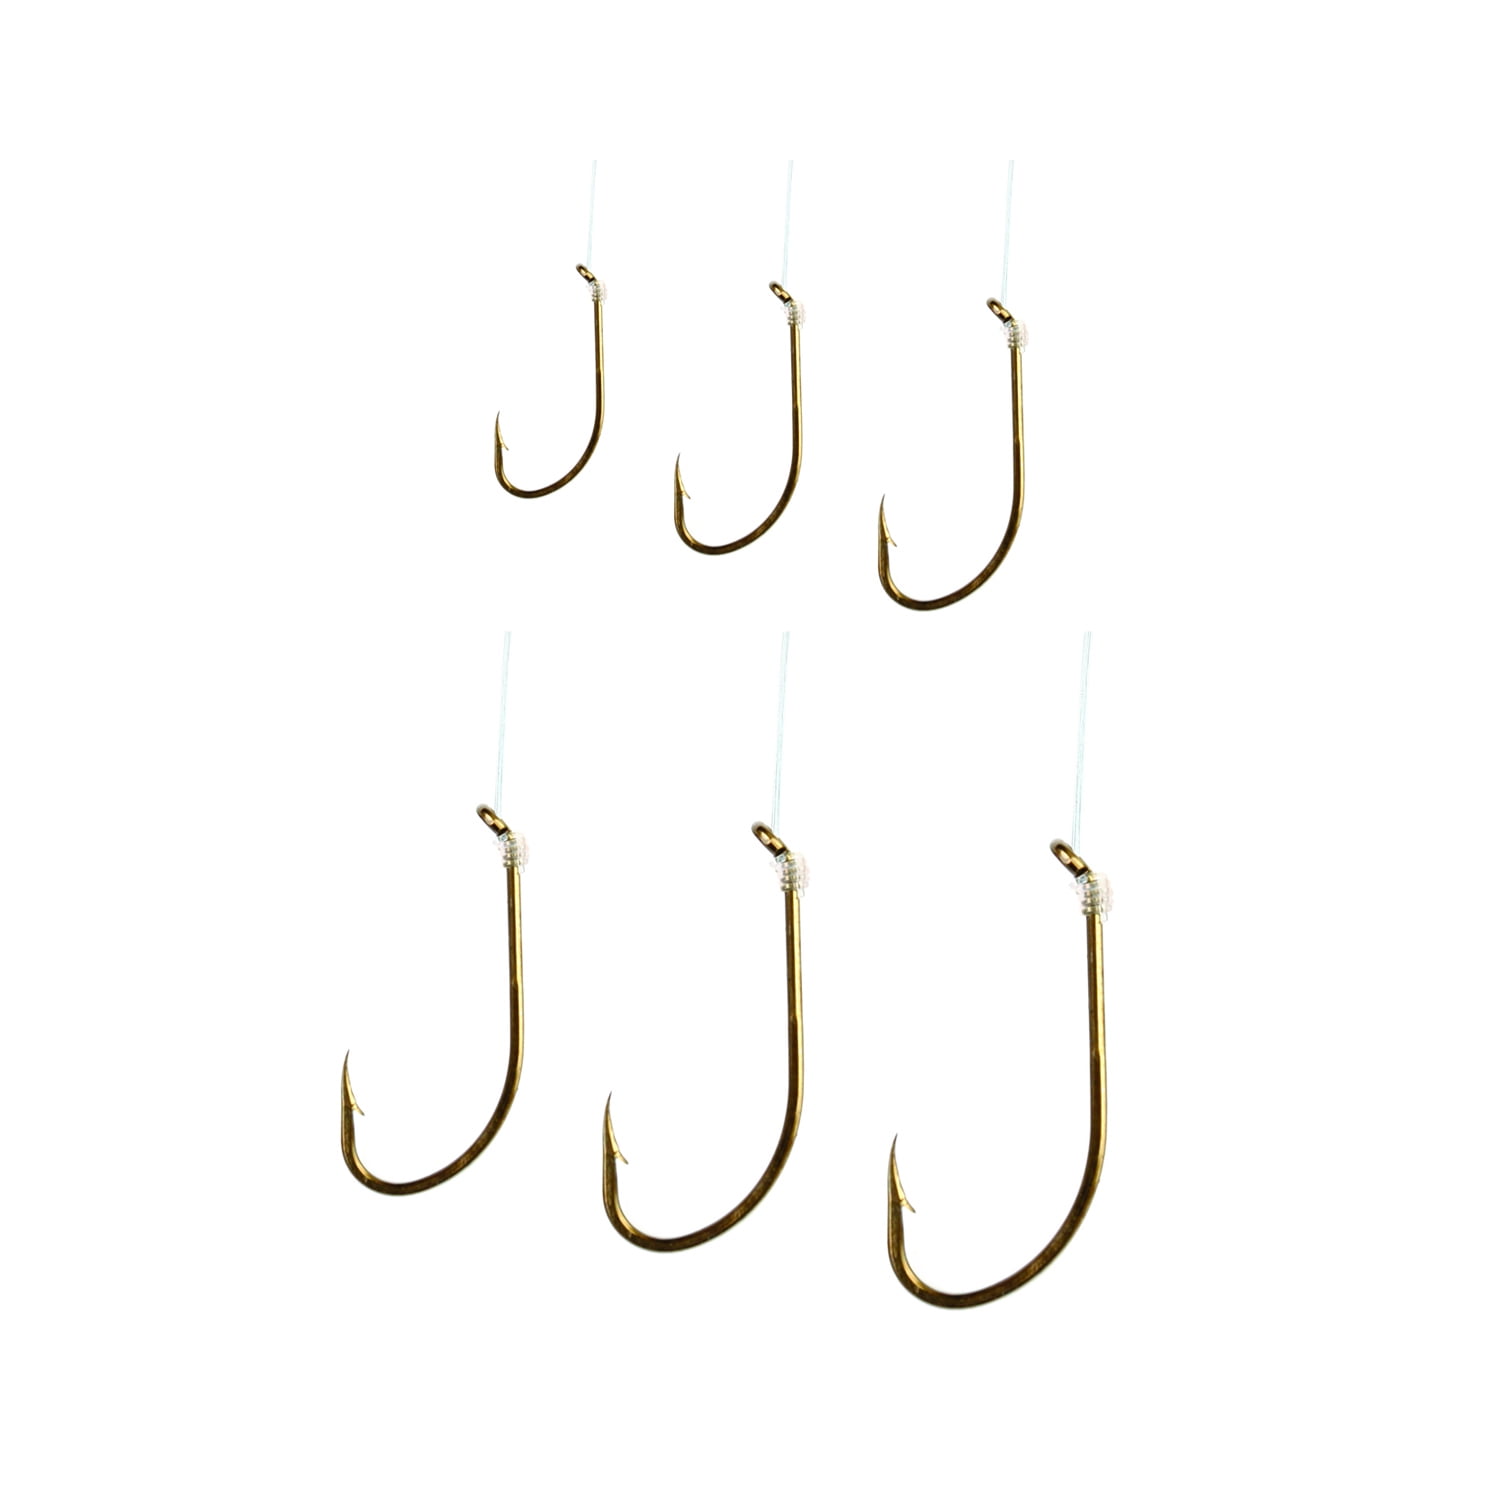 Eagle Claw Plain Shank Snell Fish Hook, Size 4 - Buy Online